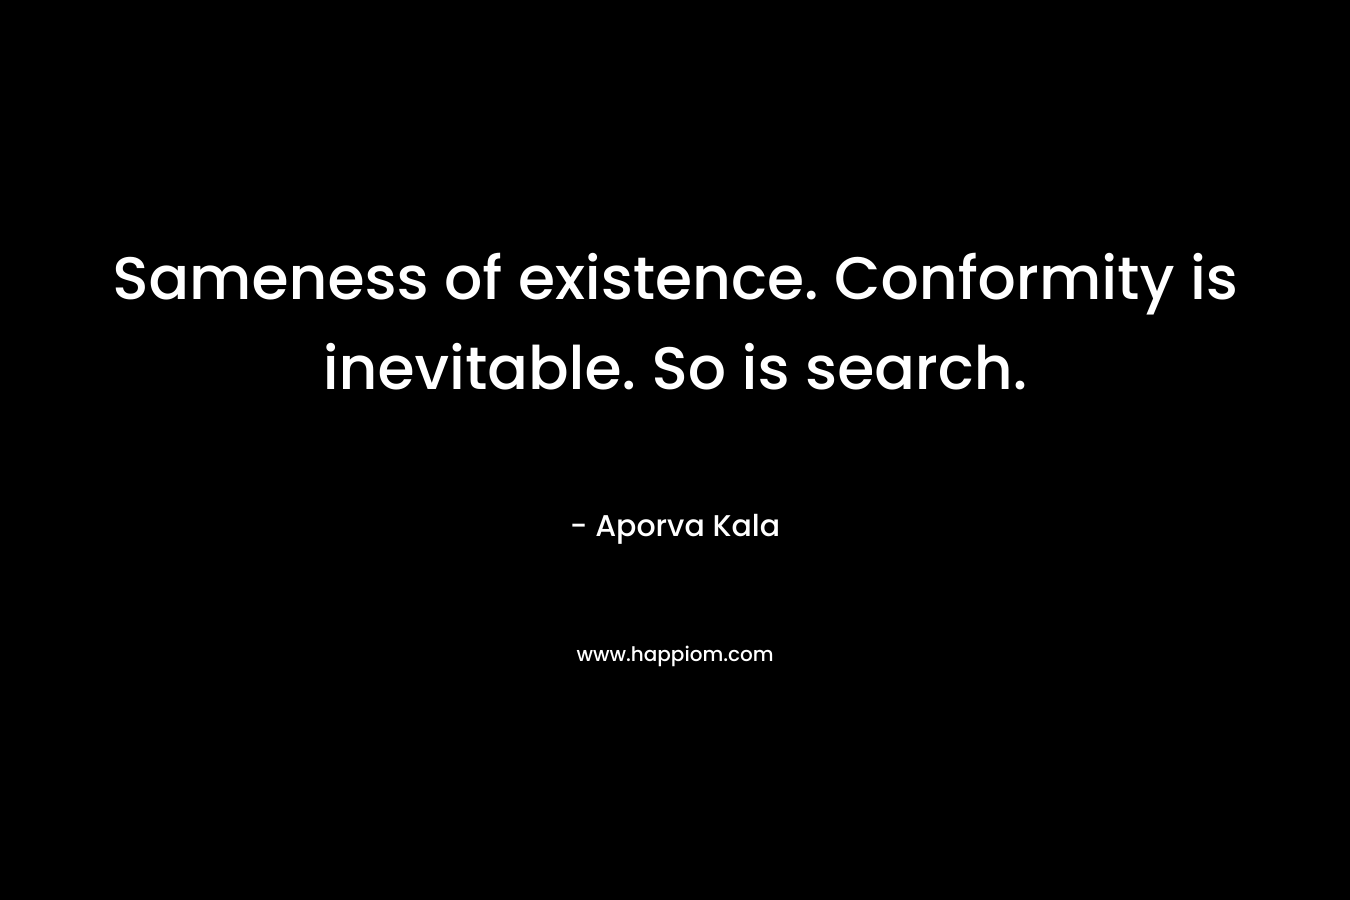 Sameness of existence. Conformity is inevitable. So is search. – Aporva Kala